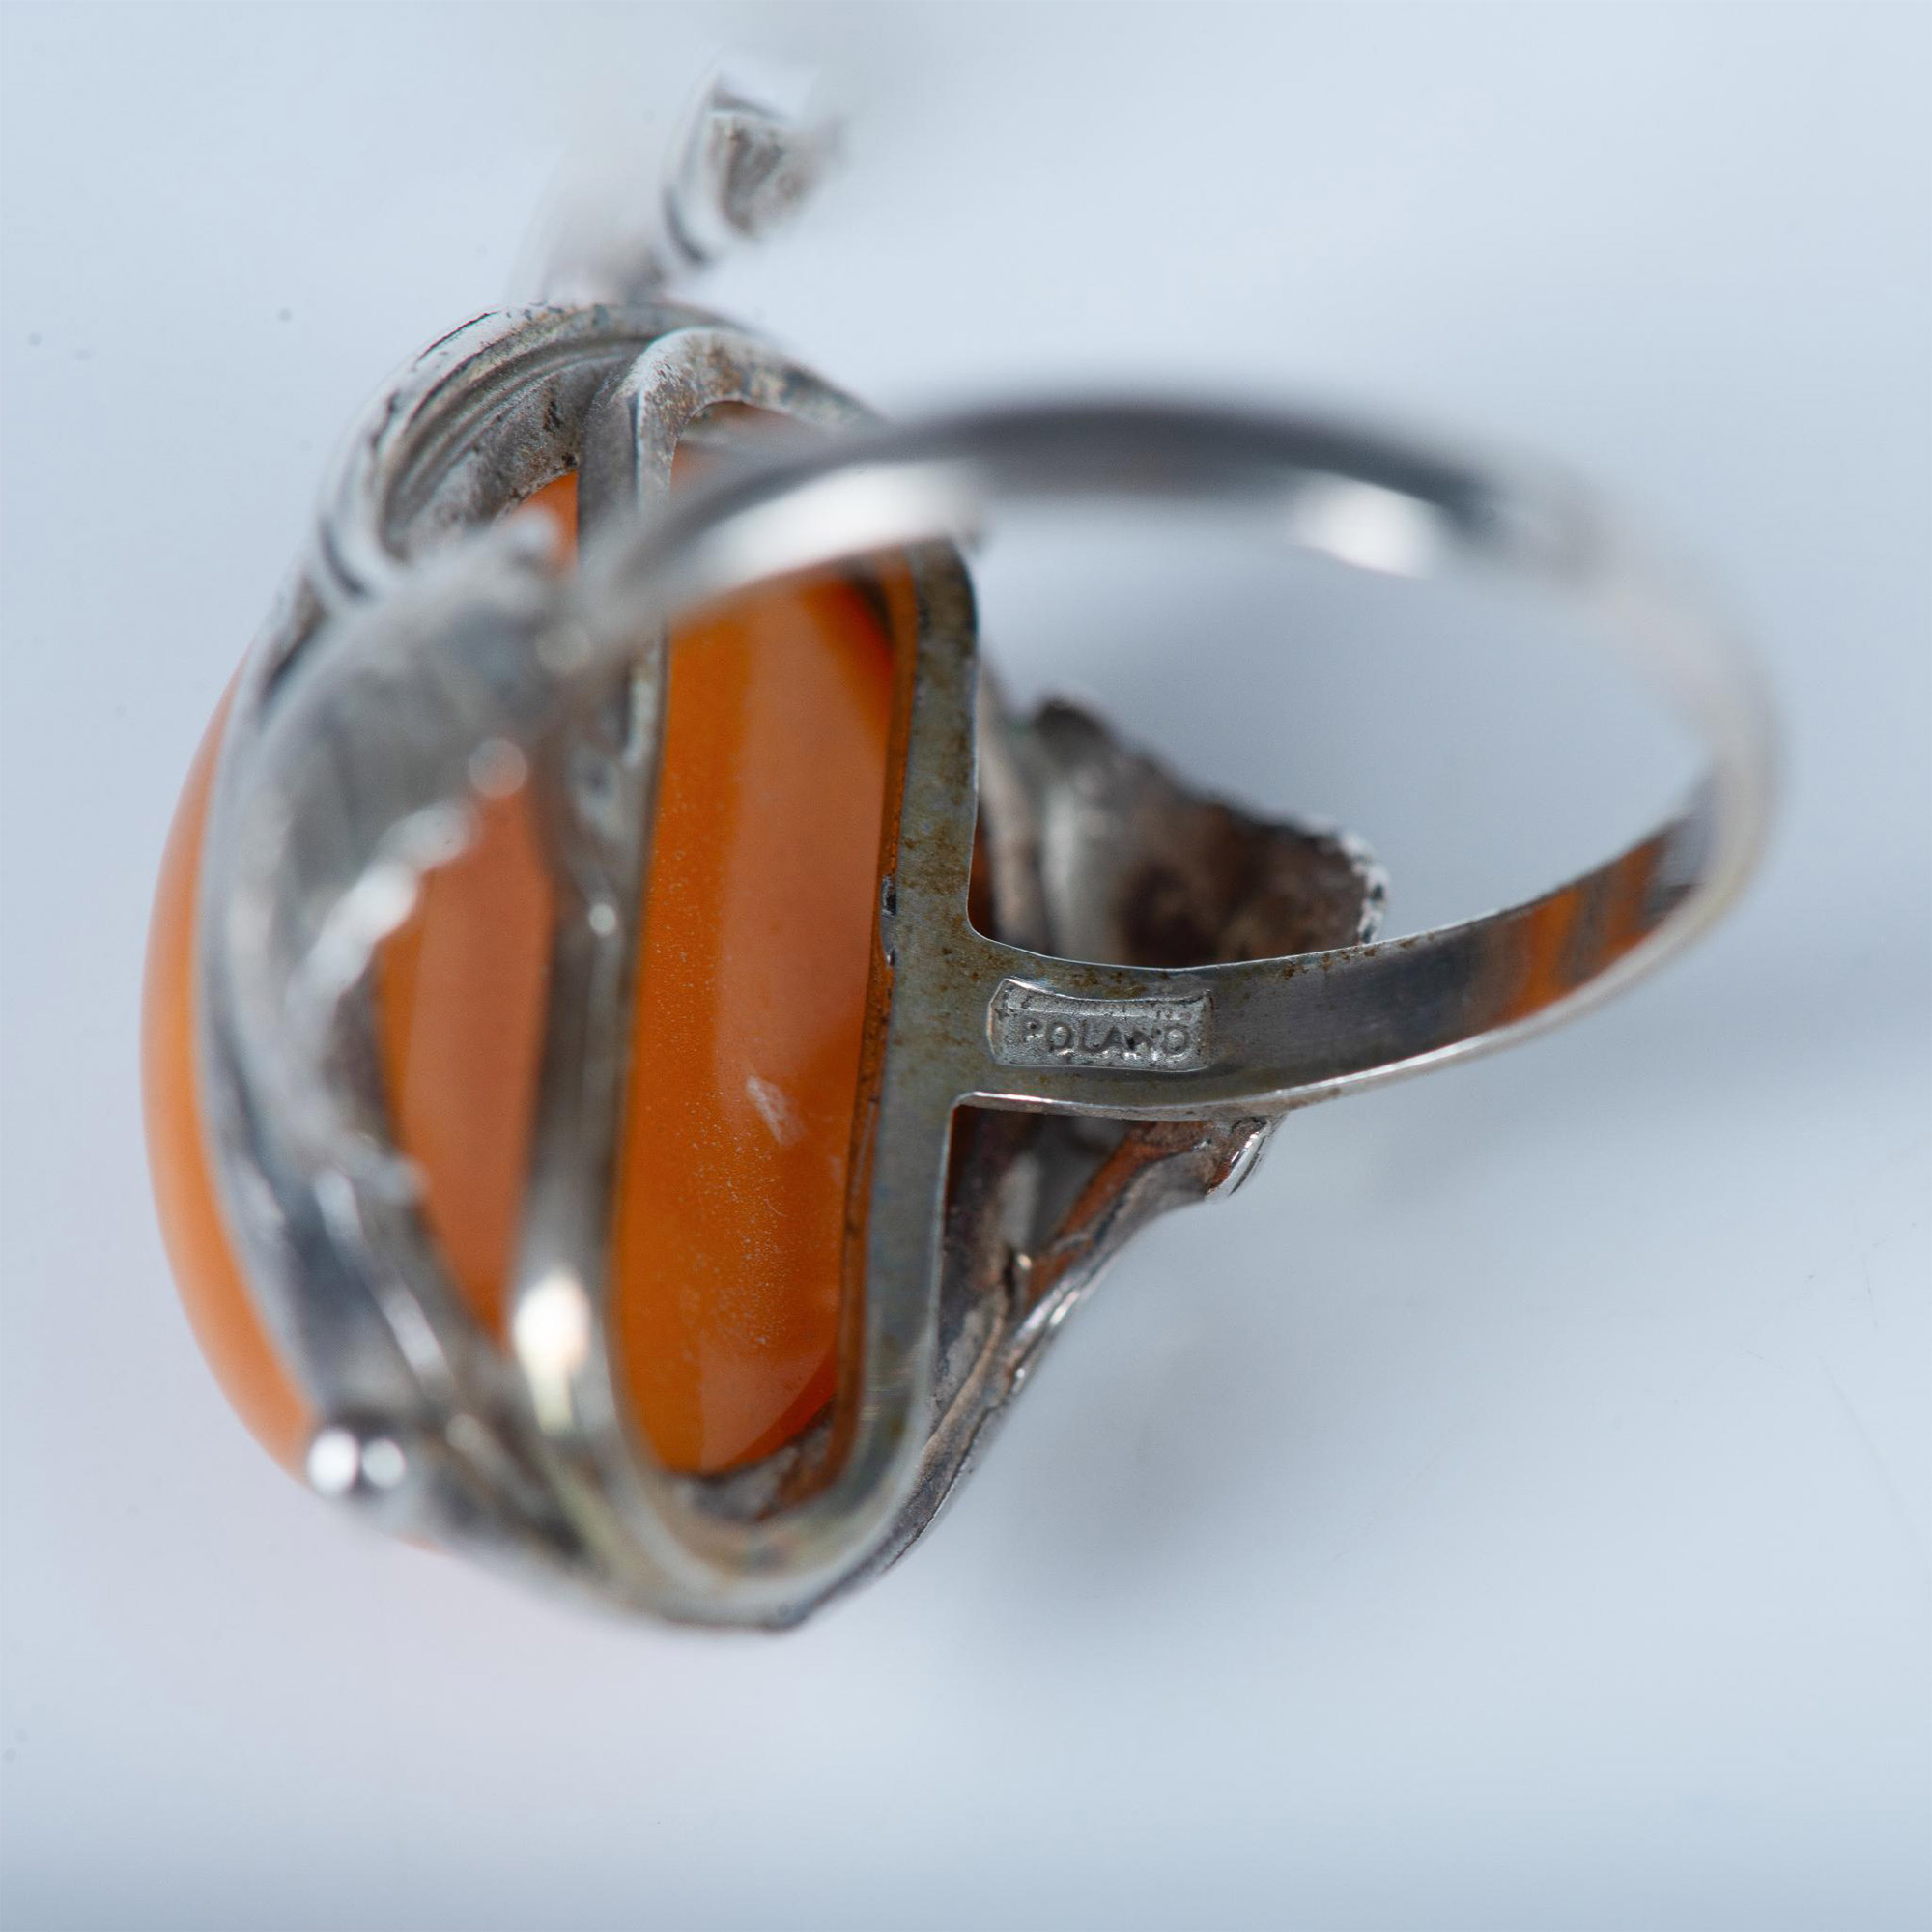 Gorgeous Baltic Amber & Sterling Silver Ring - Image 2 of 6